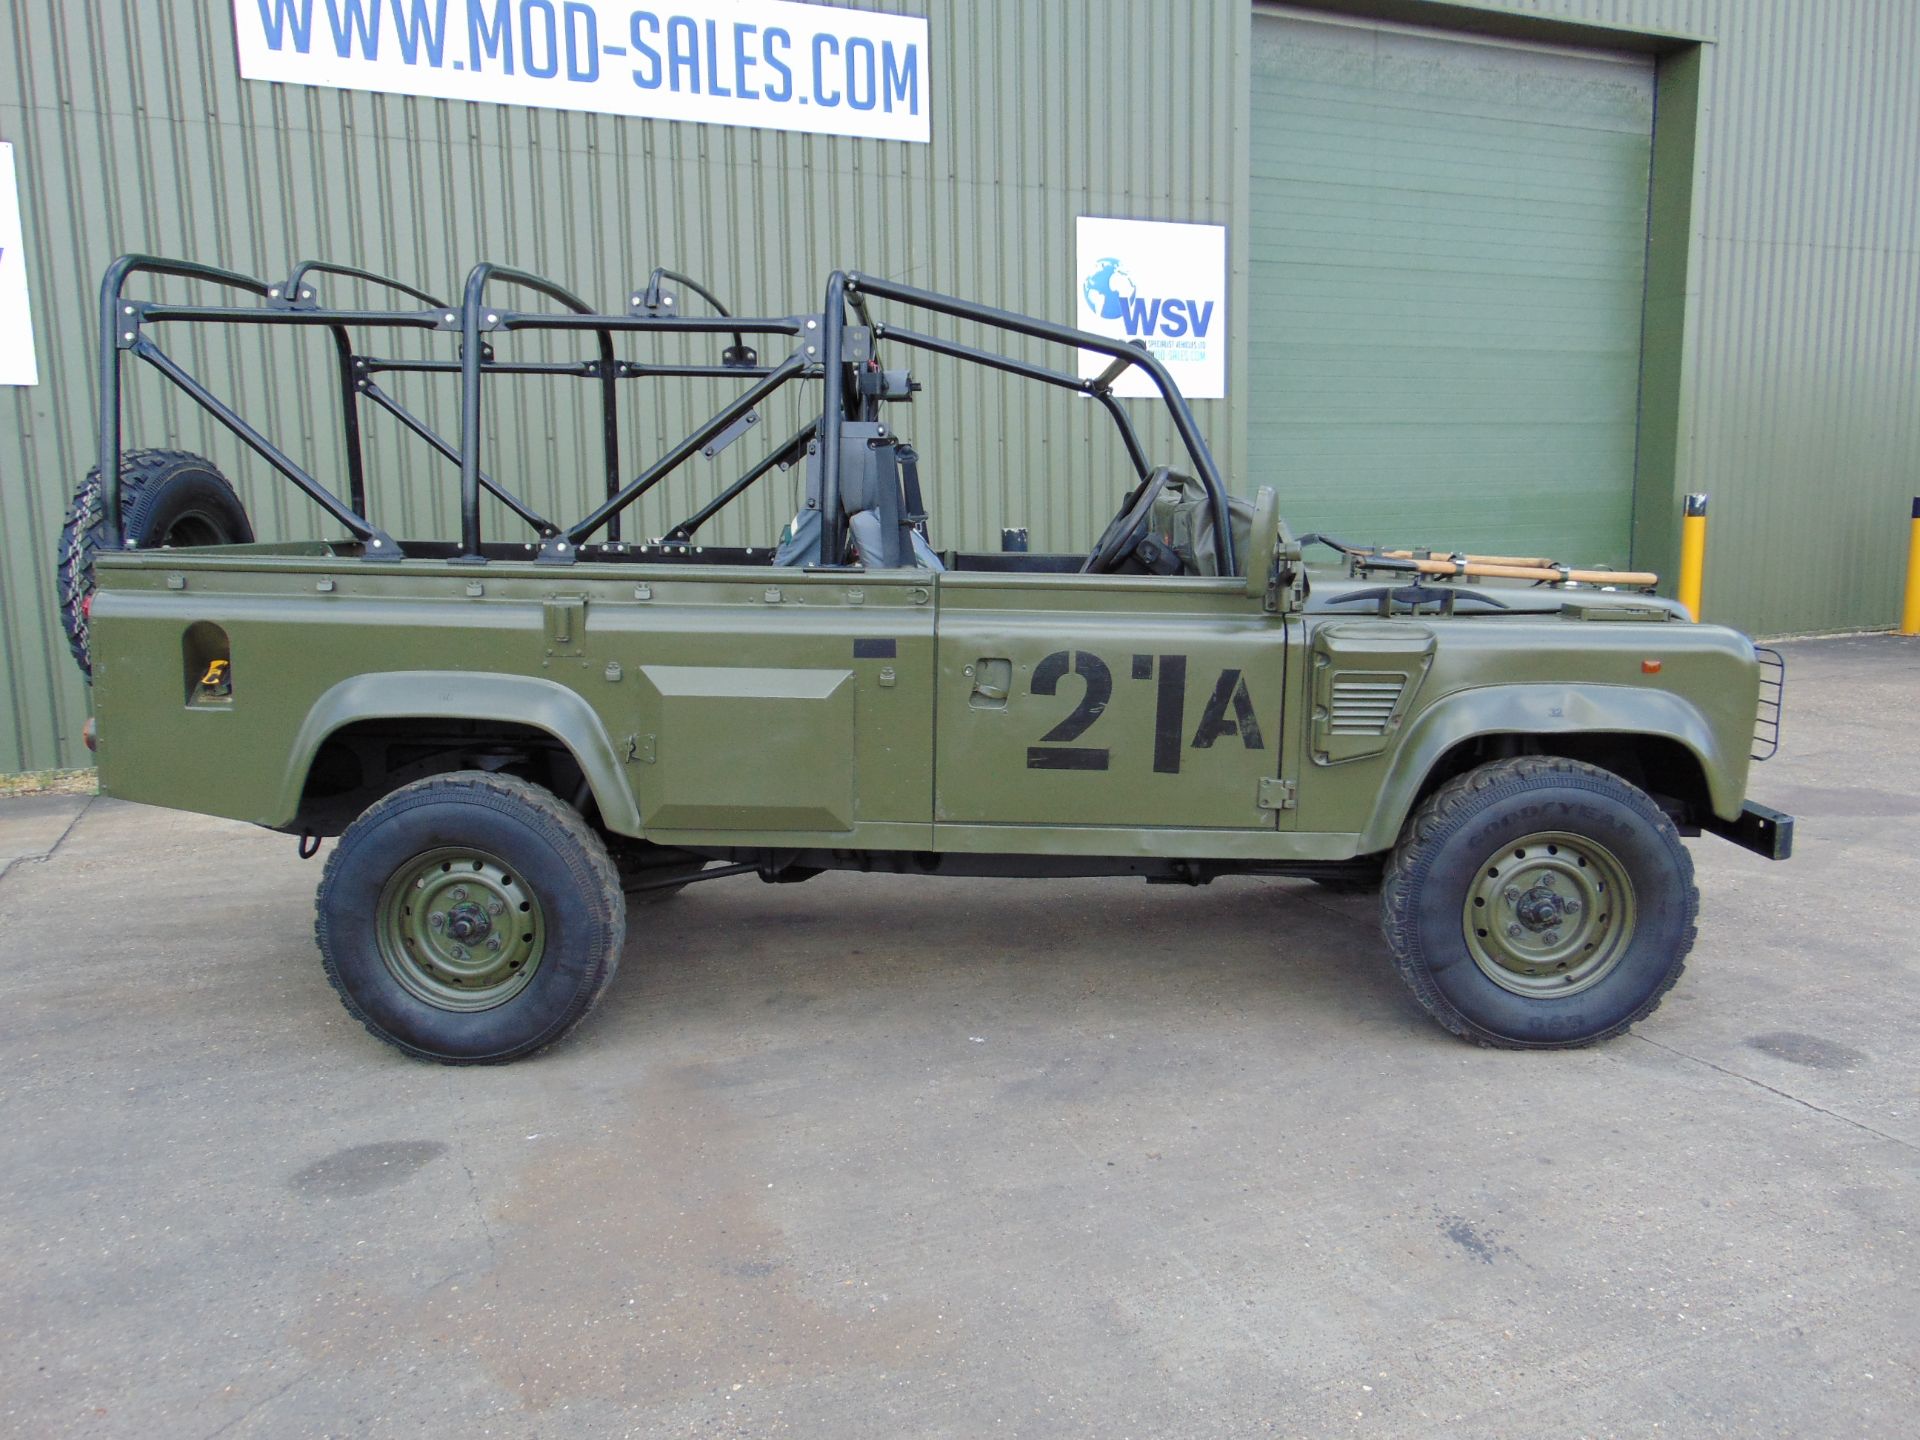 Land Rover Defender Wolf 110 Scout vehicle 300 Tdi - Image 10 of 37